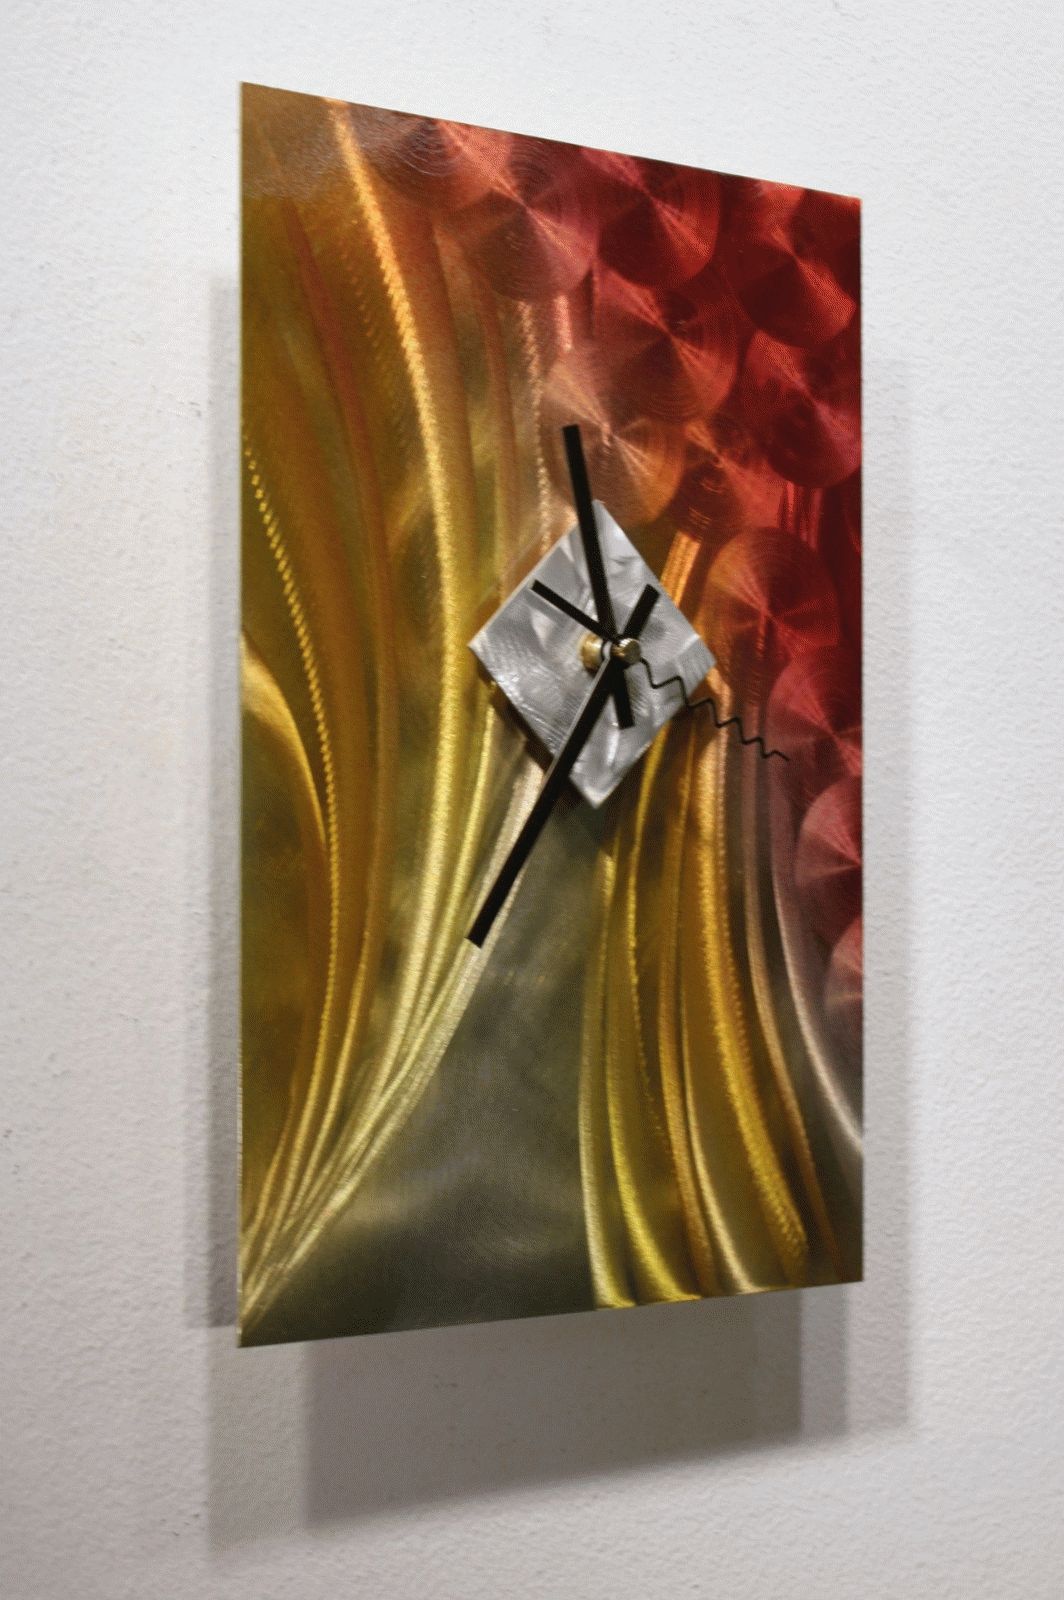 Metal Wall Art Sculpture Clock Modern Abstract Painting Decor Intended For Well Known Abstract Metal Wall Art With Clock (View 5 of 15)